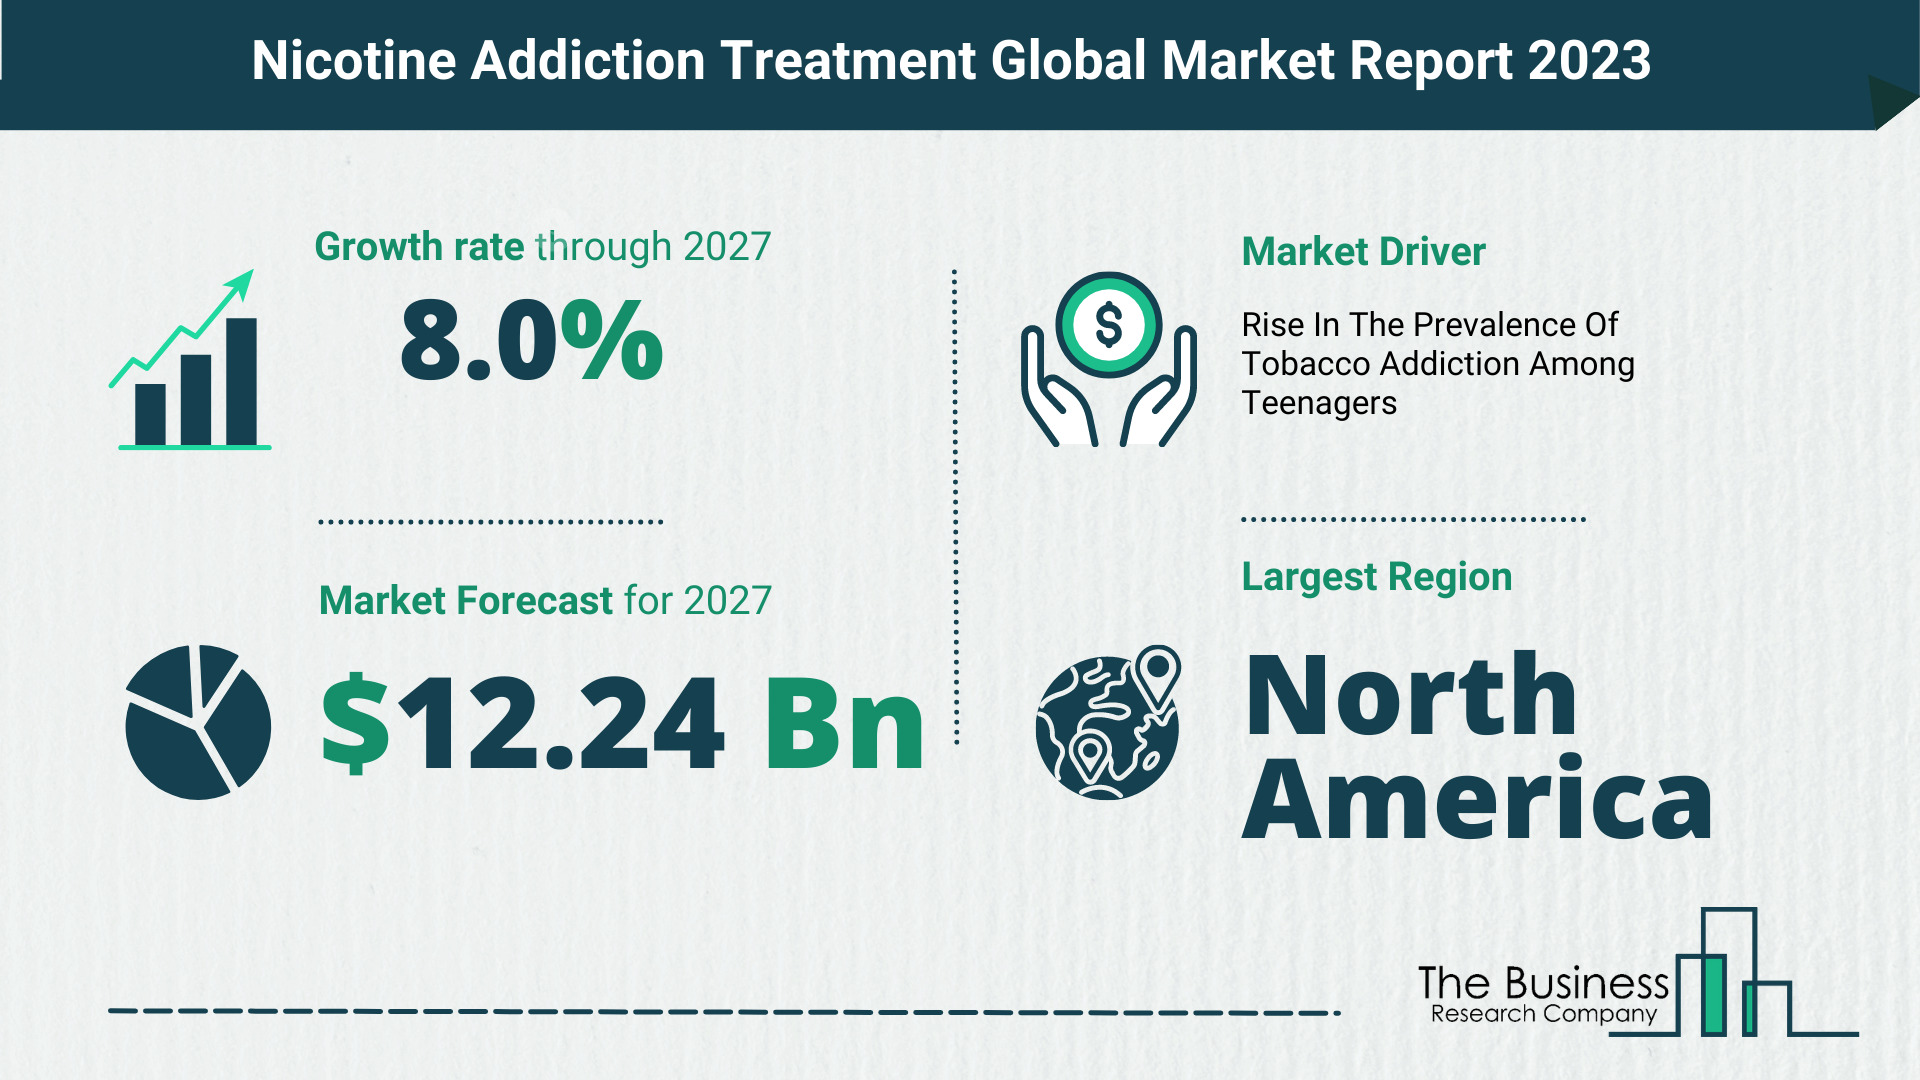 What Will The Nicotine Addiction Treatment Market Look Like In 2023?